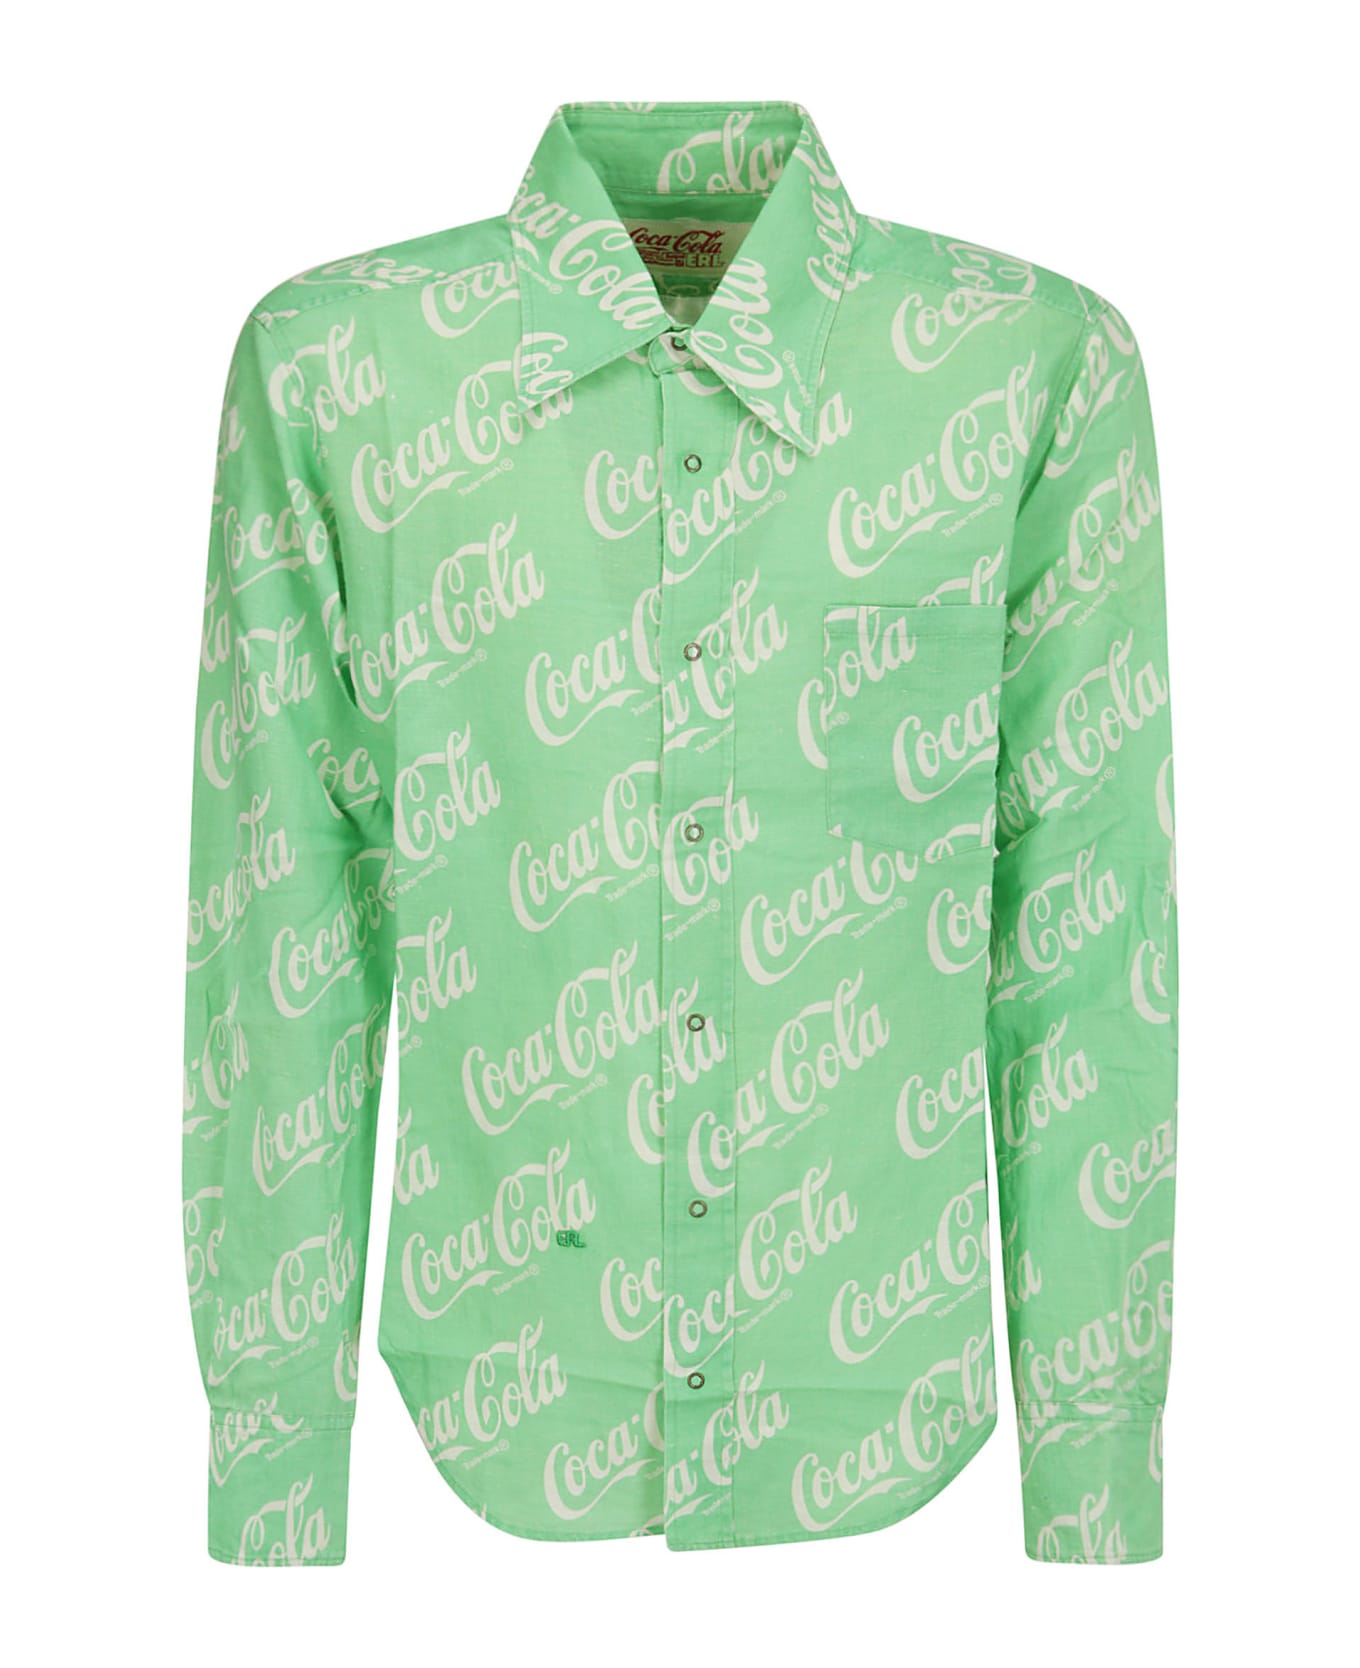 ERL Unisex Printed Button Up Shirt Woven - GREEN COCA COLA